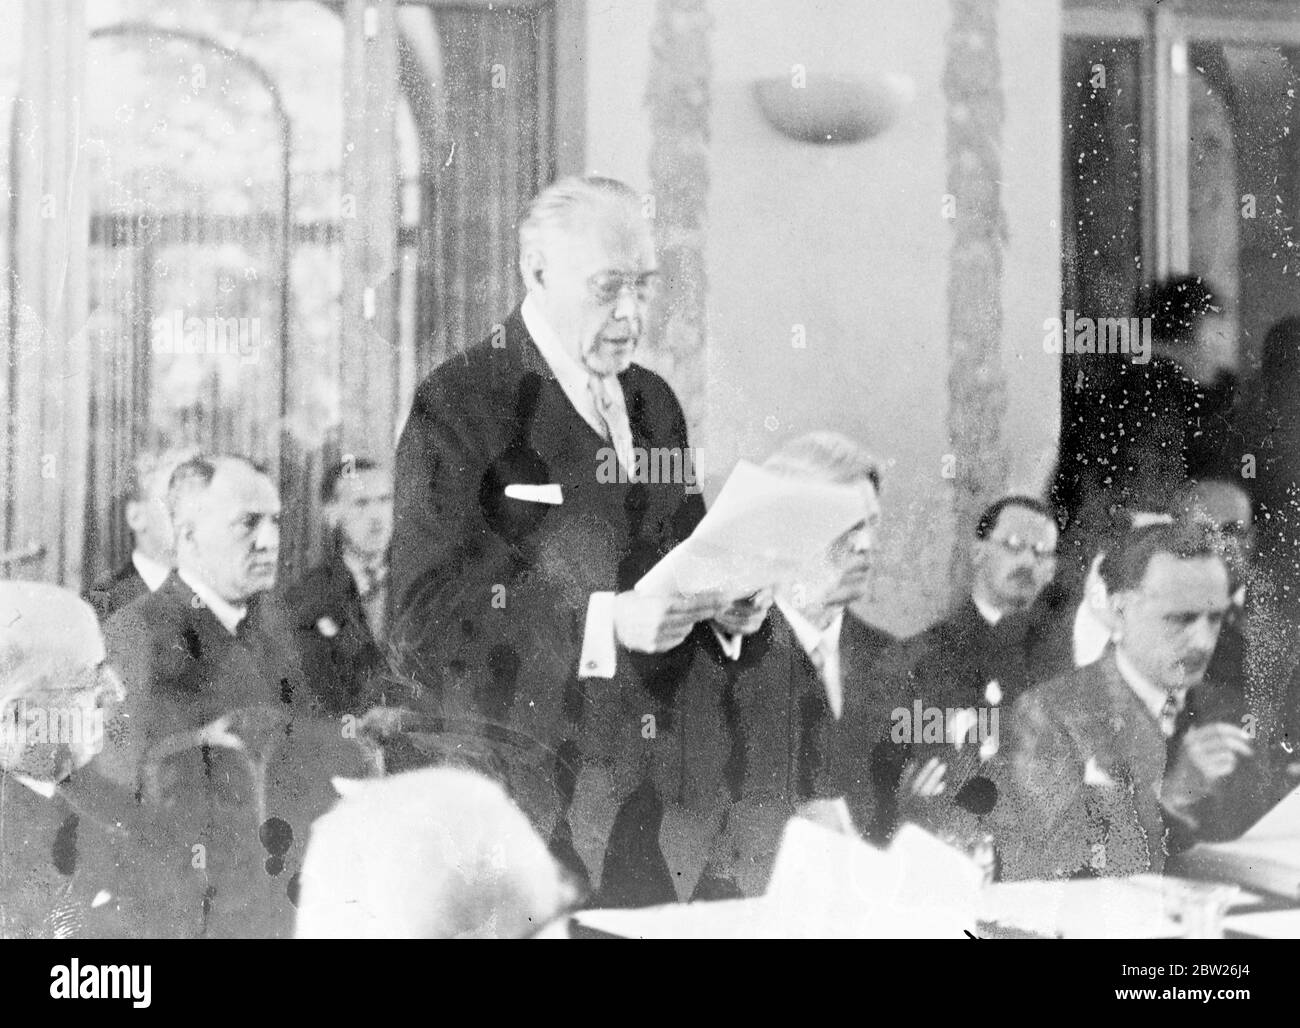 Nation seek solution of Refugee problem at Evian. American delegate's speech. Thirty nations are in conference at Evian las Baines, France, in an effort to find a solution to the problem of the thousands of refugees, mainly Jewish, who are leaving Germany. Photo shows, Mr Myron C Taylor, the American delegate, addressing the conference. 7 July 1938 Stock Photo